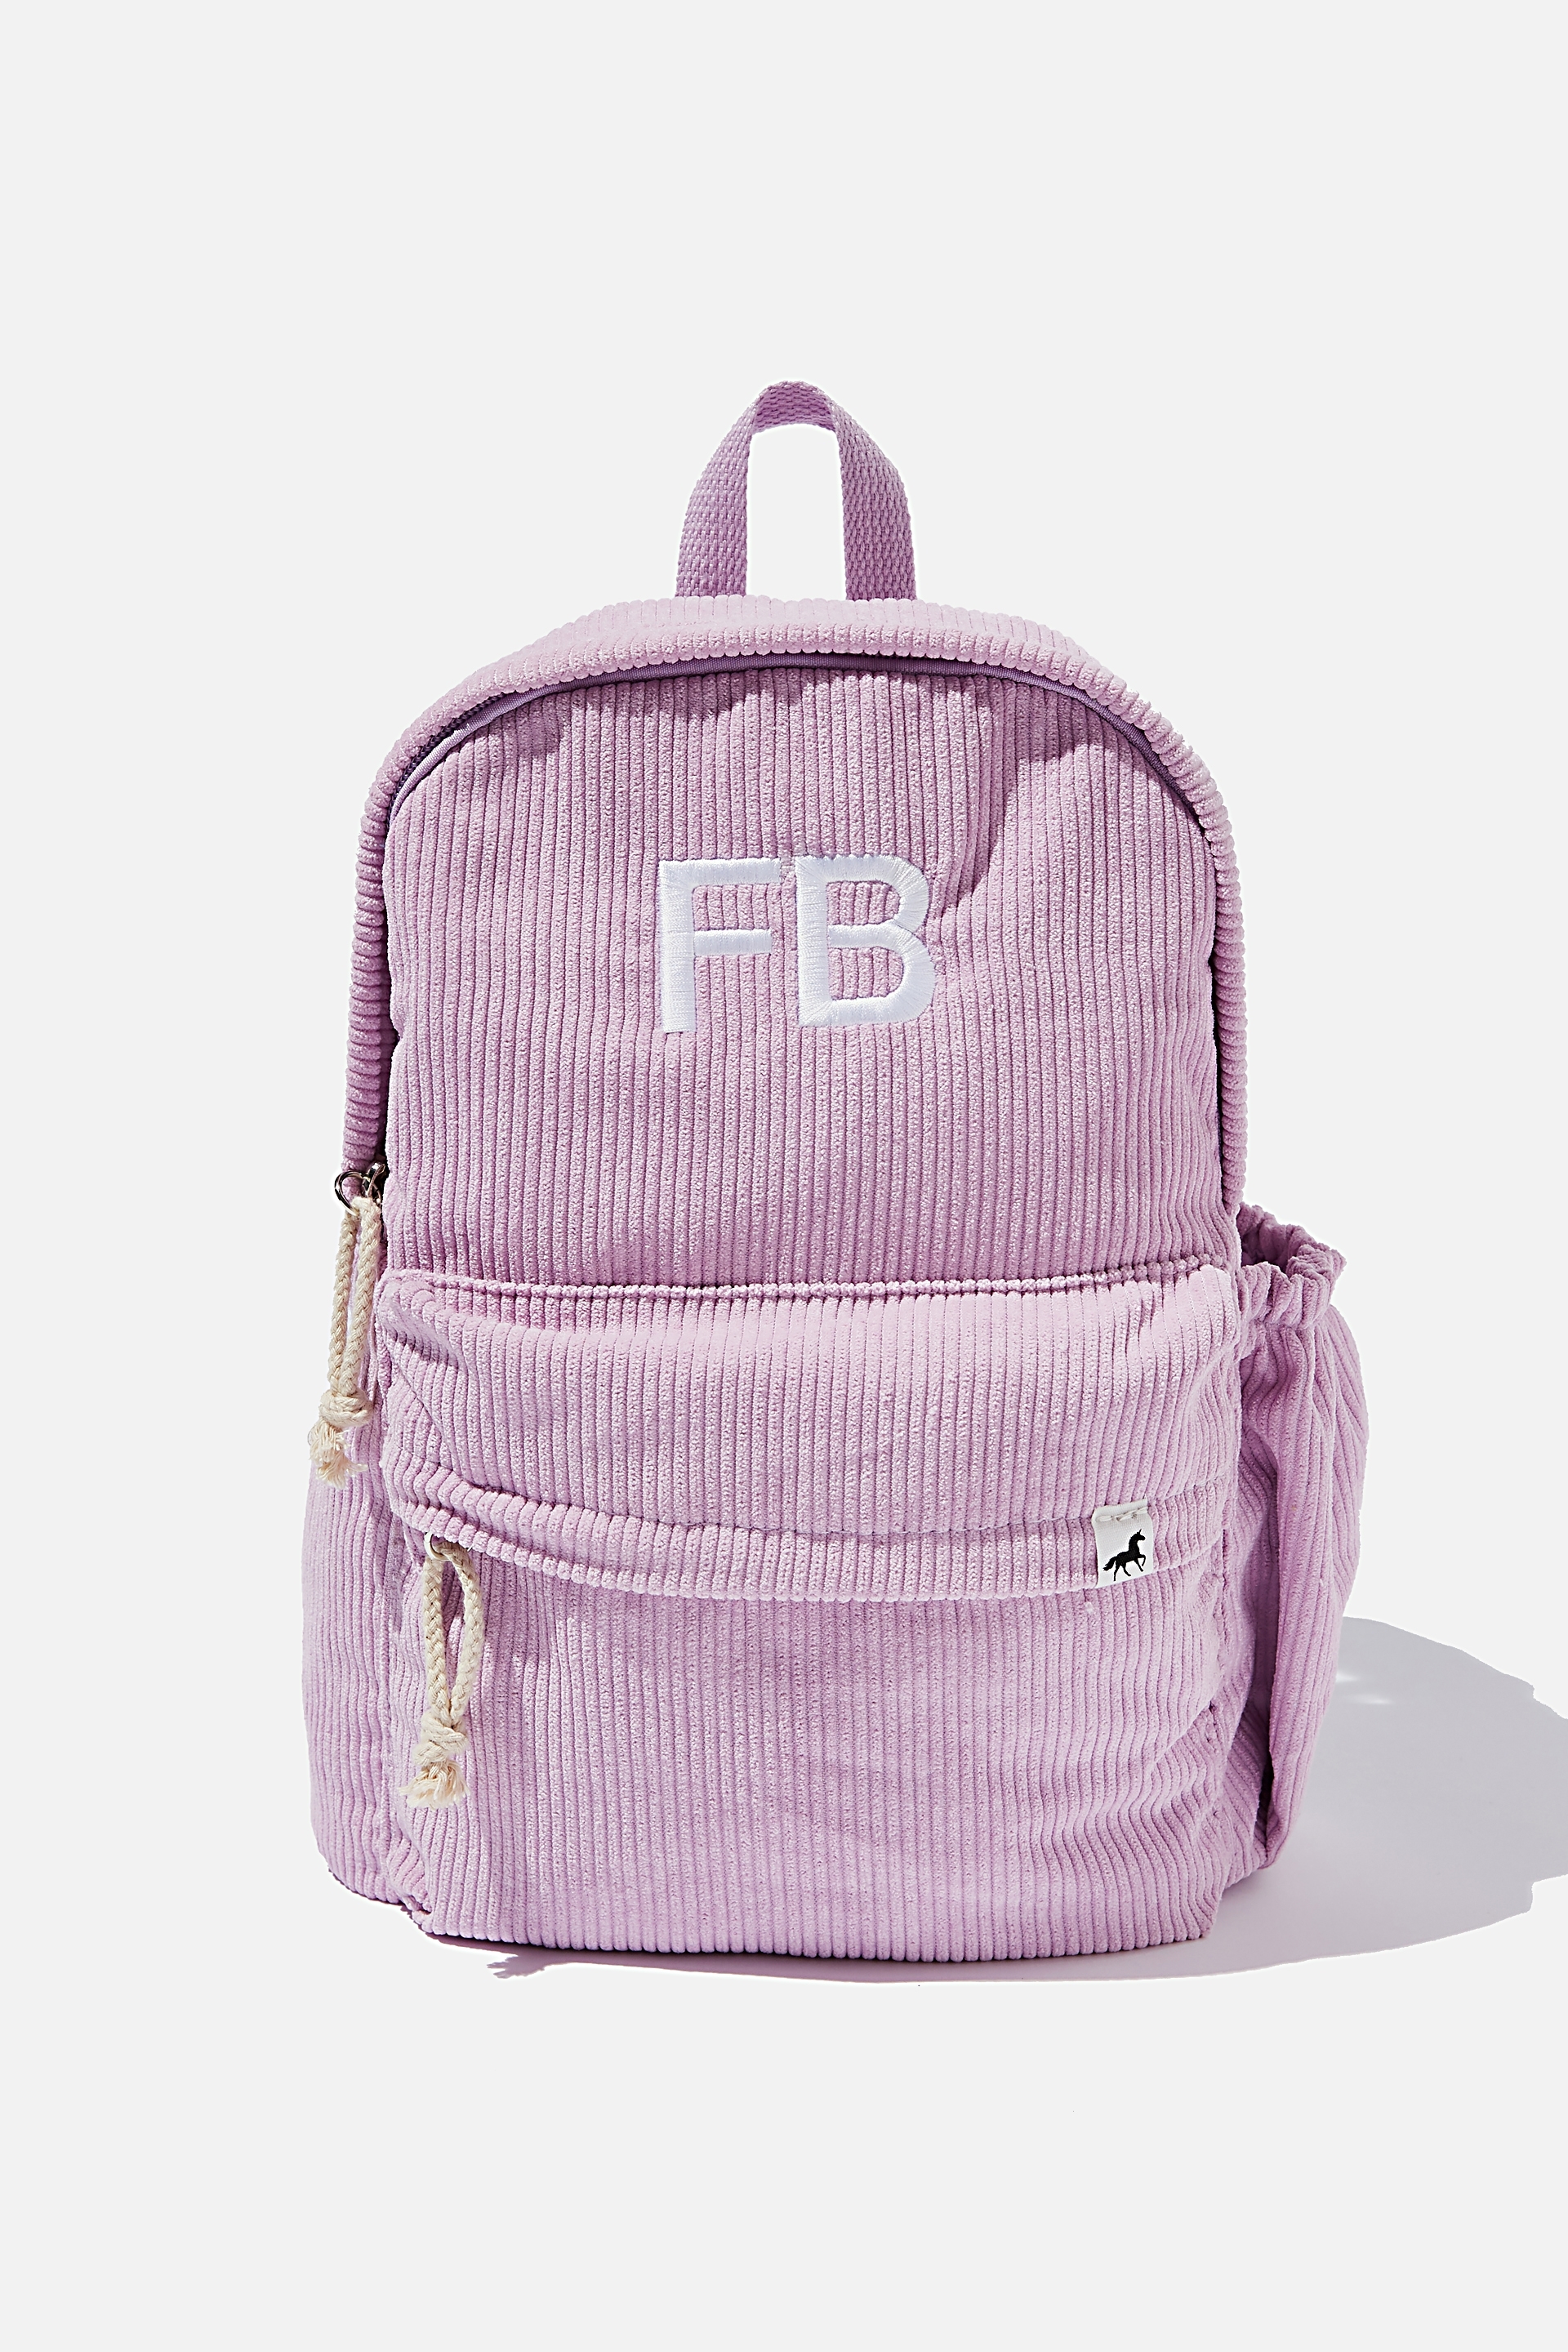 Cotton On Kids - Personalised Back To School Cord Backpack - Pale violet